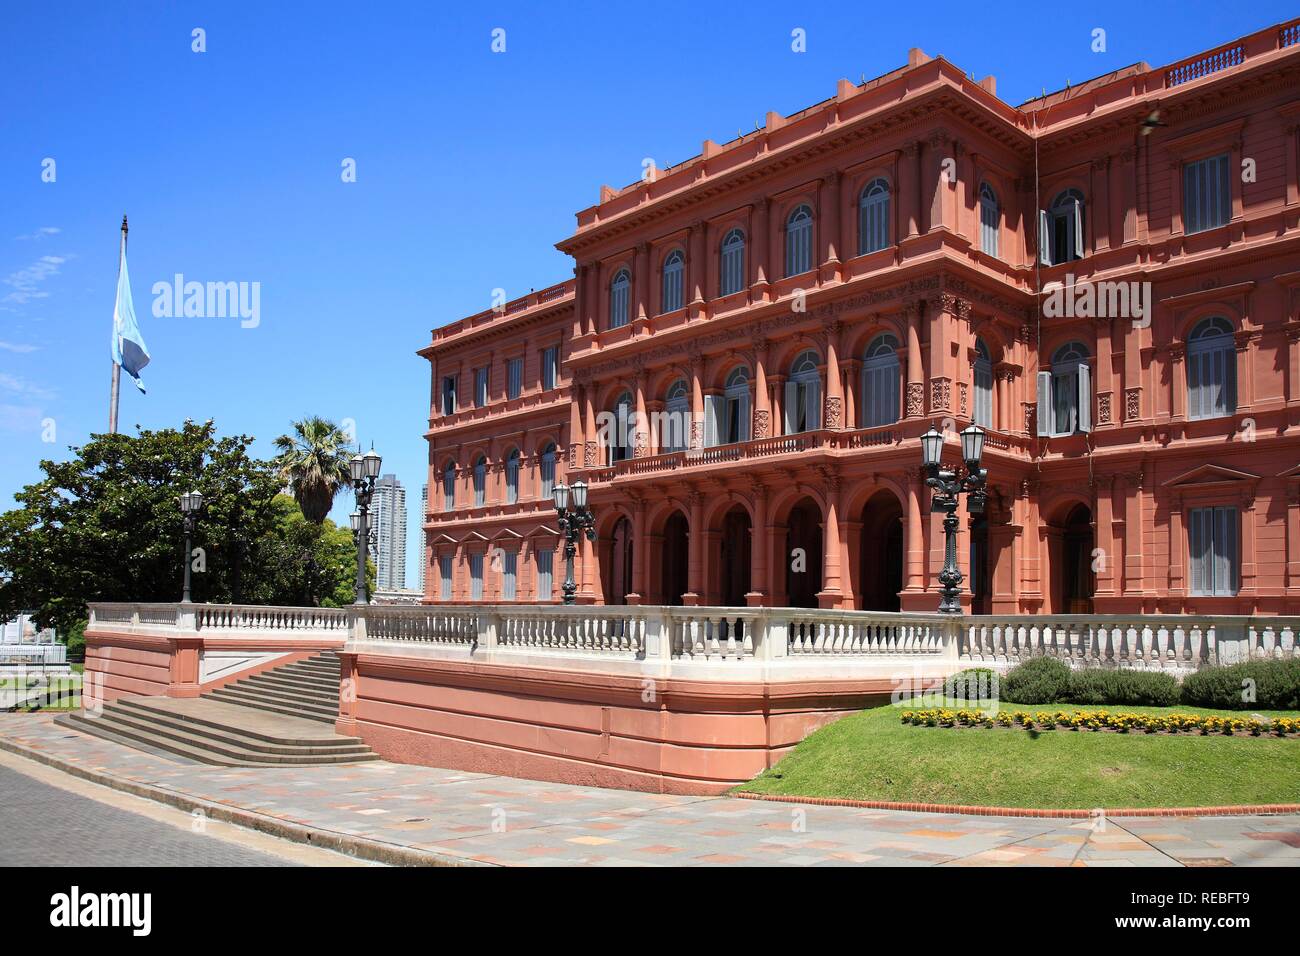 Casa Rosada, presidential palace on the eastern side of the Plaza de Mayo Square, Buenos Aires, Argentina Stock Photo